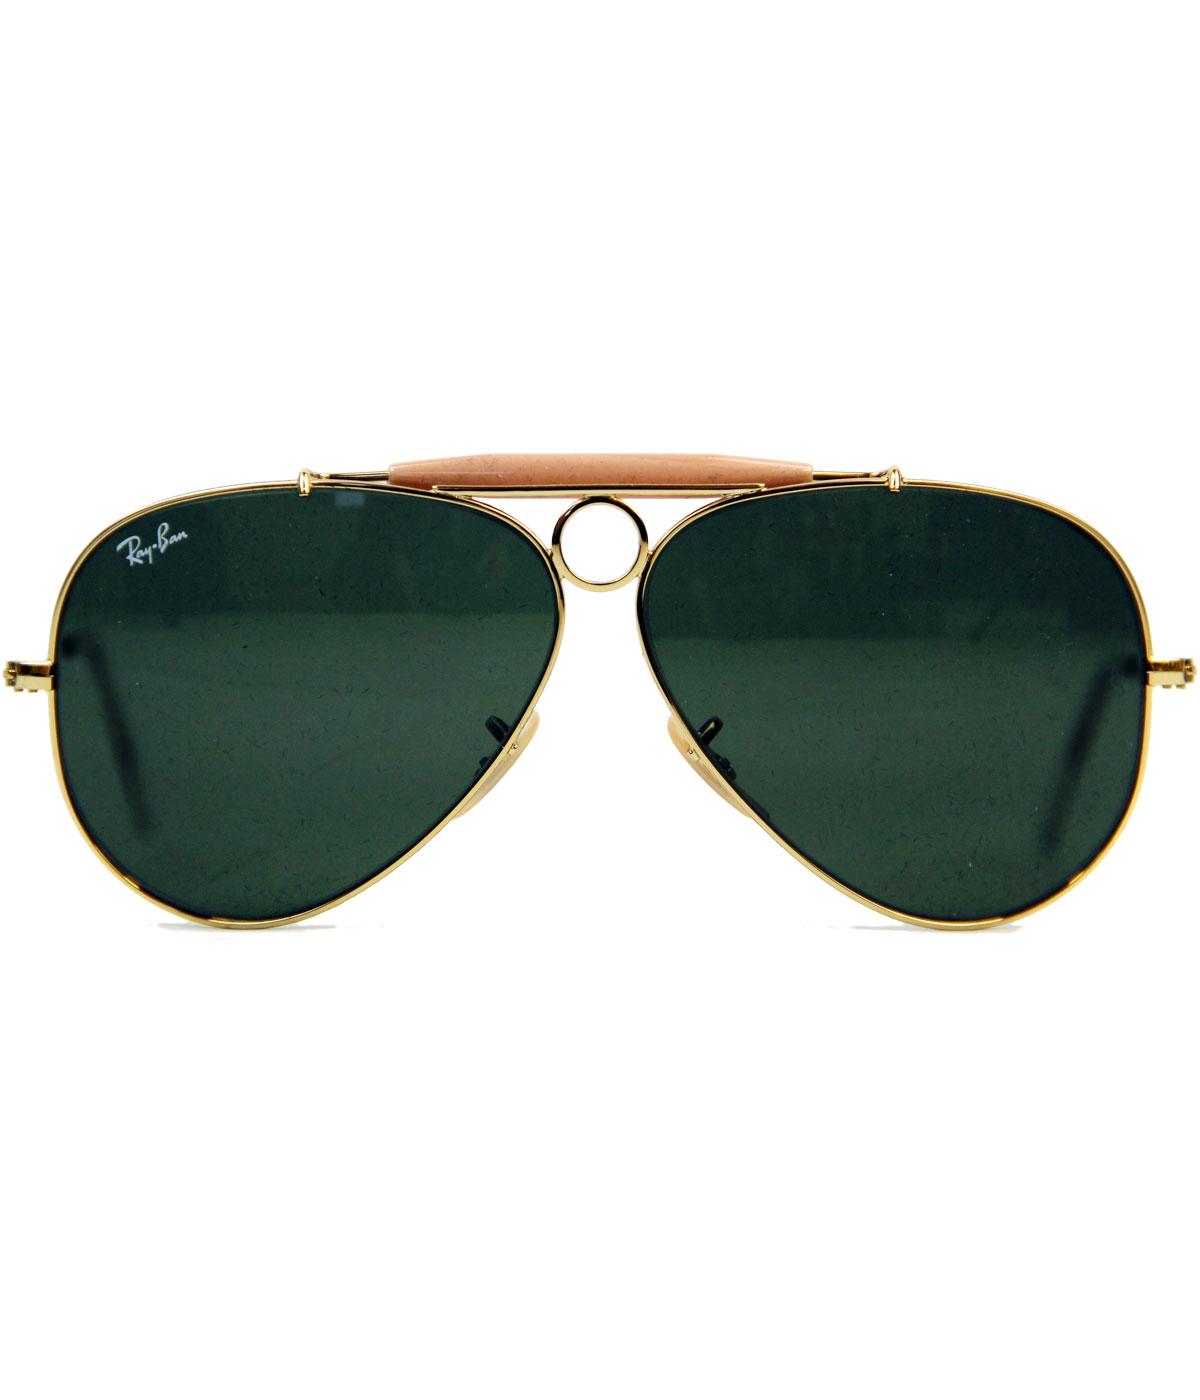 Tom Audreath Skrive ud Frost Shooter Sunglasses | RAY-BAN Retro 60s Mod Shooter Indie Sunglasses